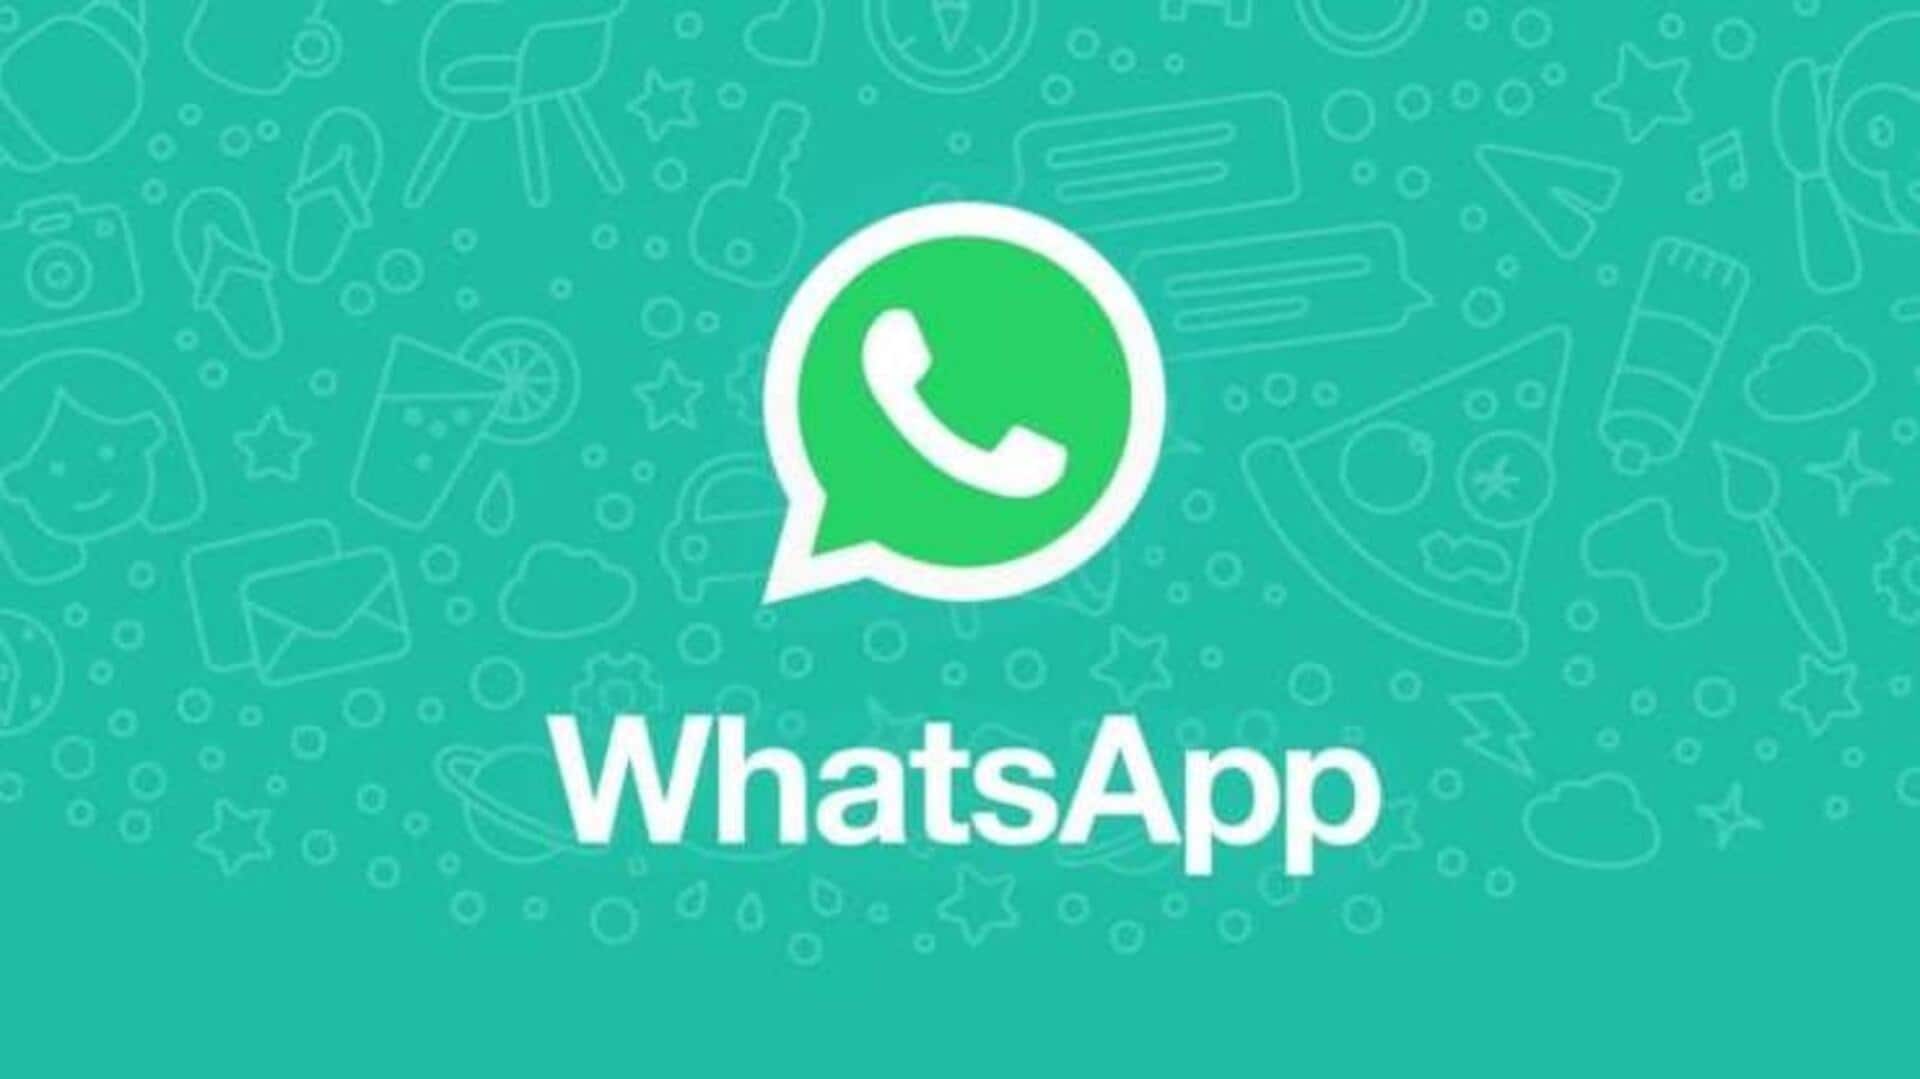 WhatsApp will soon allow sharing original quality pictures and videos